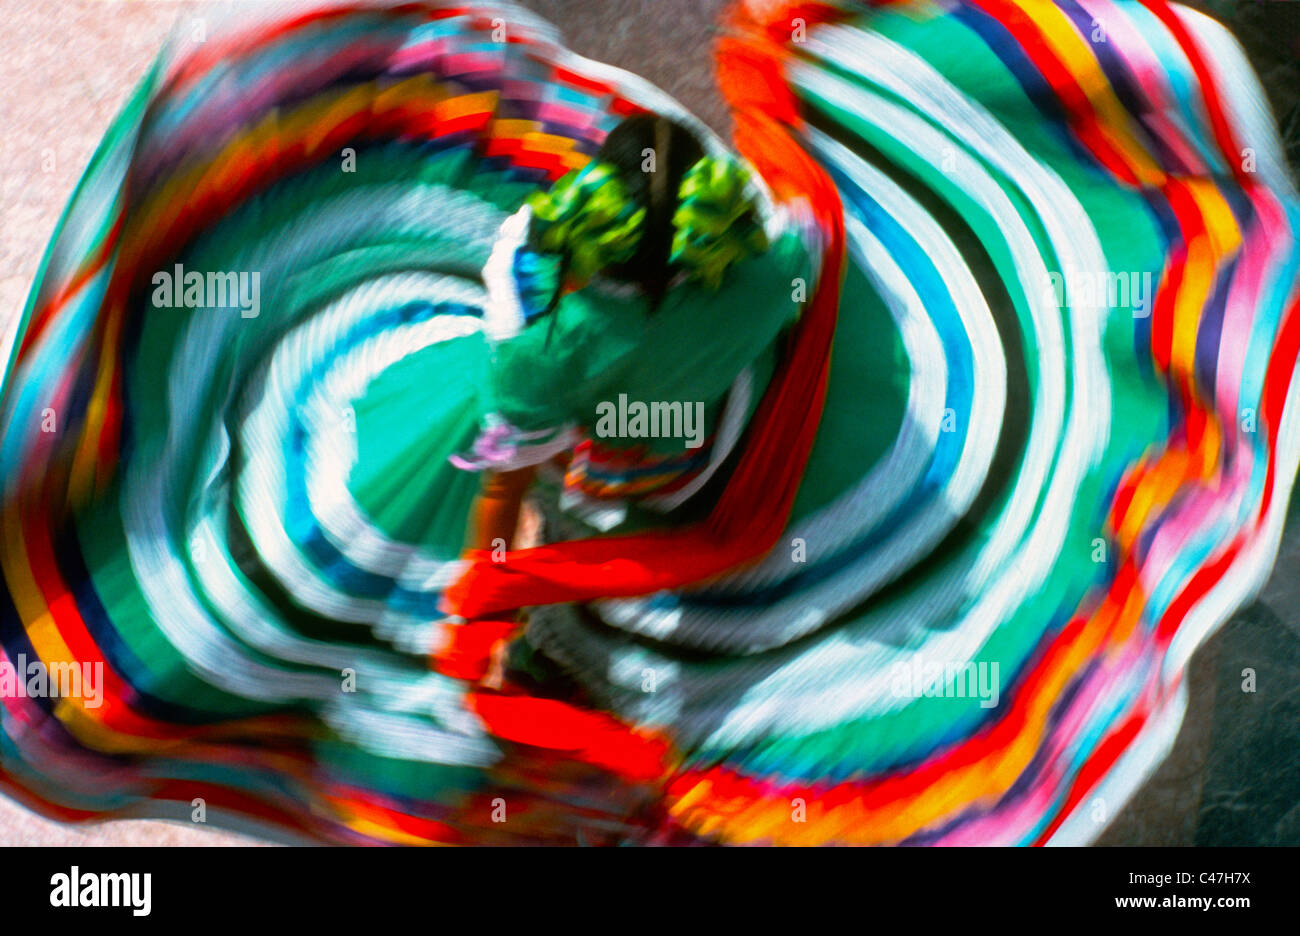 An overhead view shows off the colorful traditional dress of a twirling folkloric dancer who often entertains tourists in Mexico, North America. Stock Photo